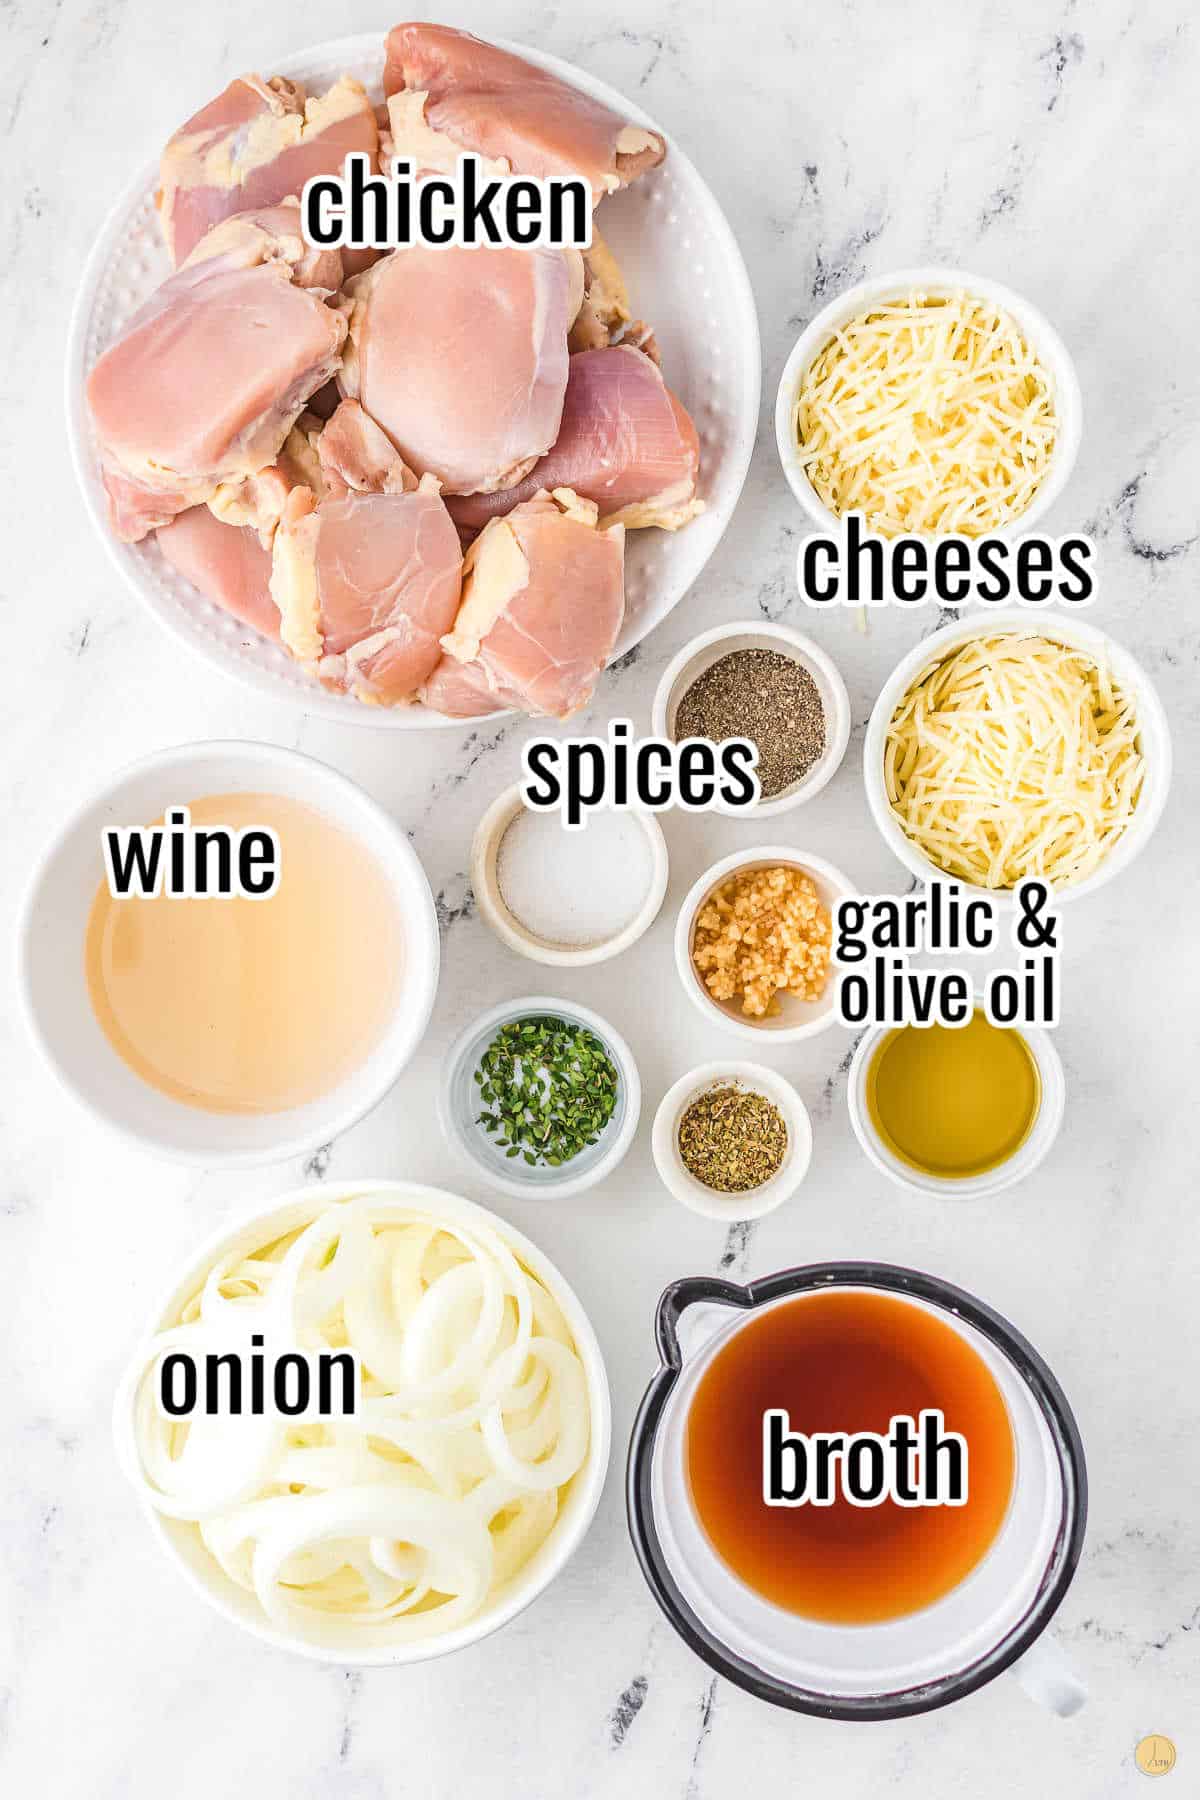 labeled ingredients for a chicken recipe